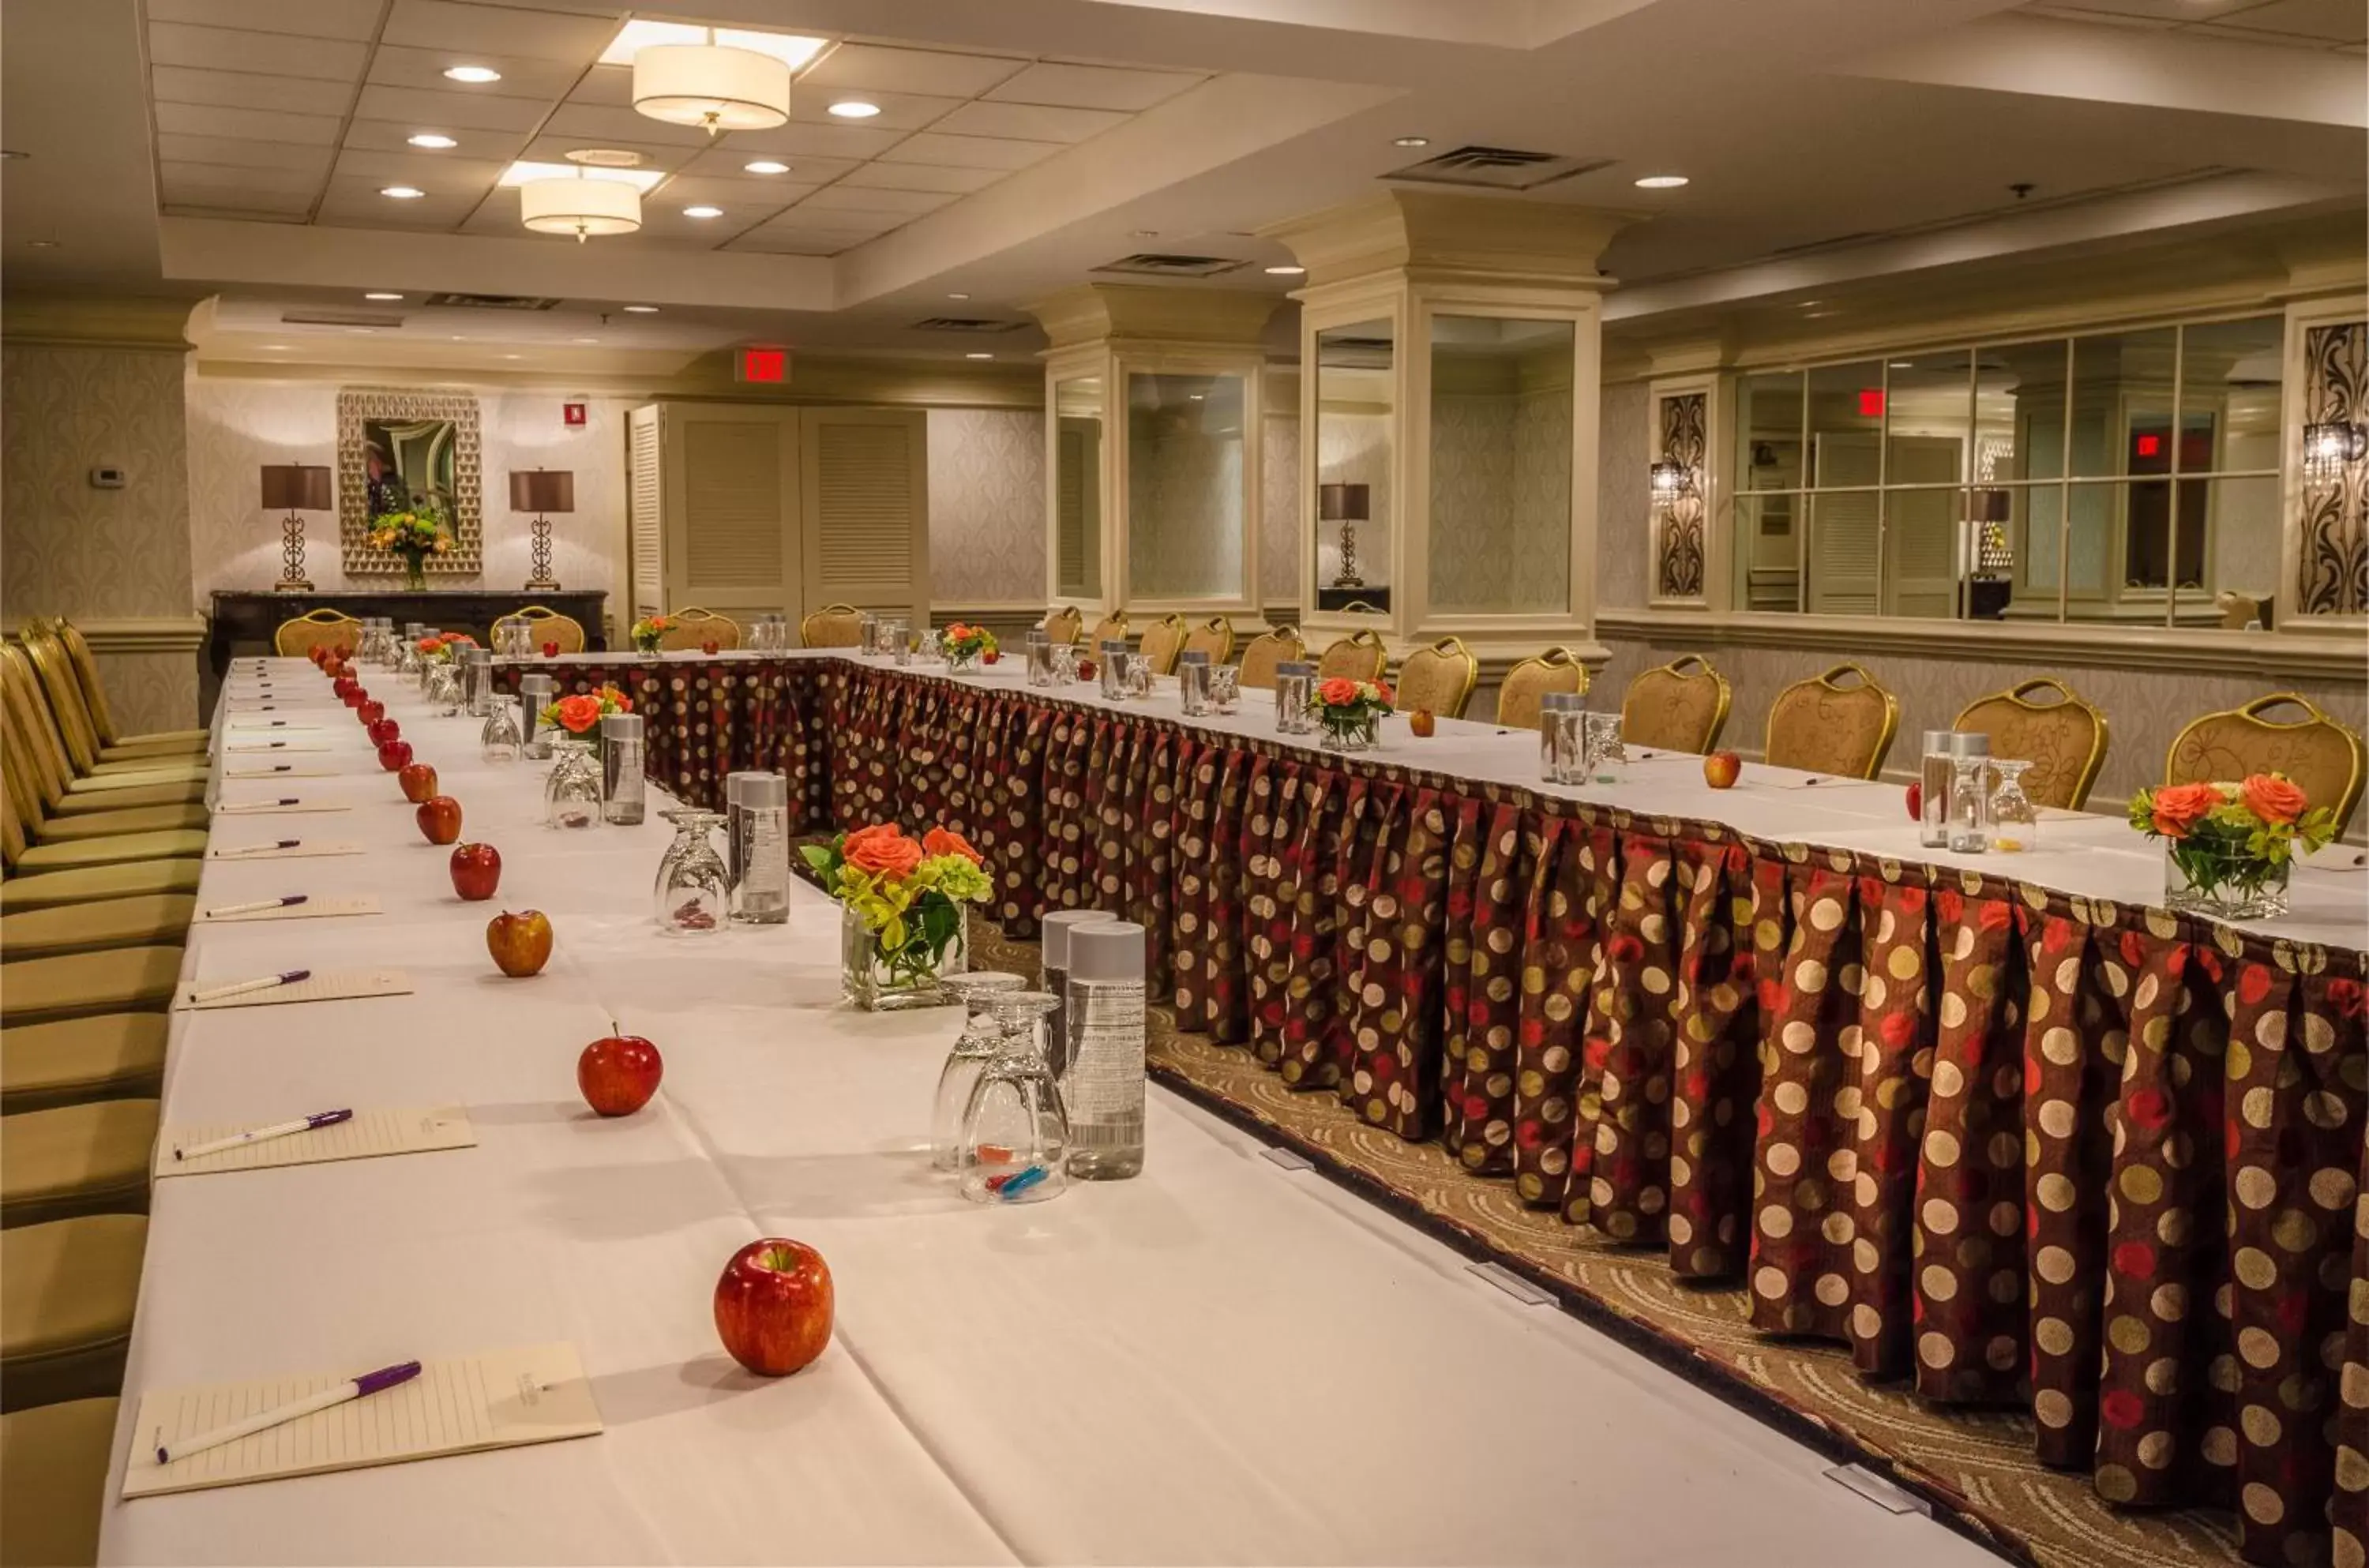 Meeting/conference room, Banquet Facilities in Beacon Hotel & Corporate Quarters